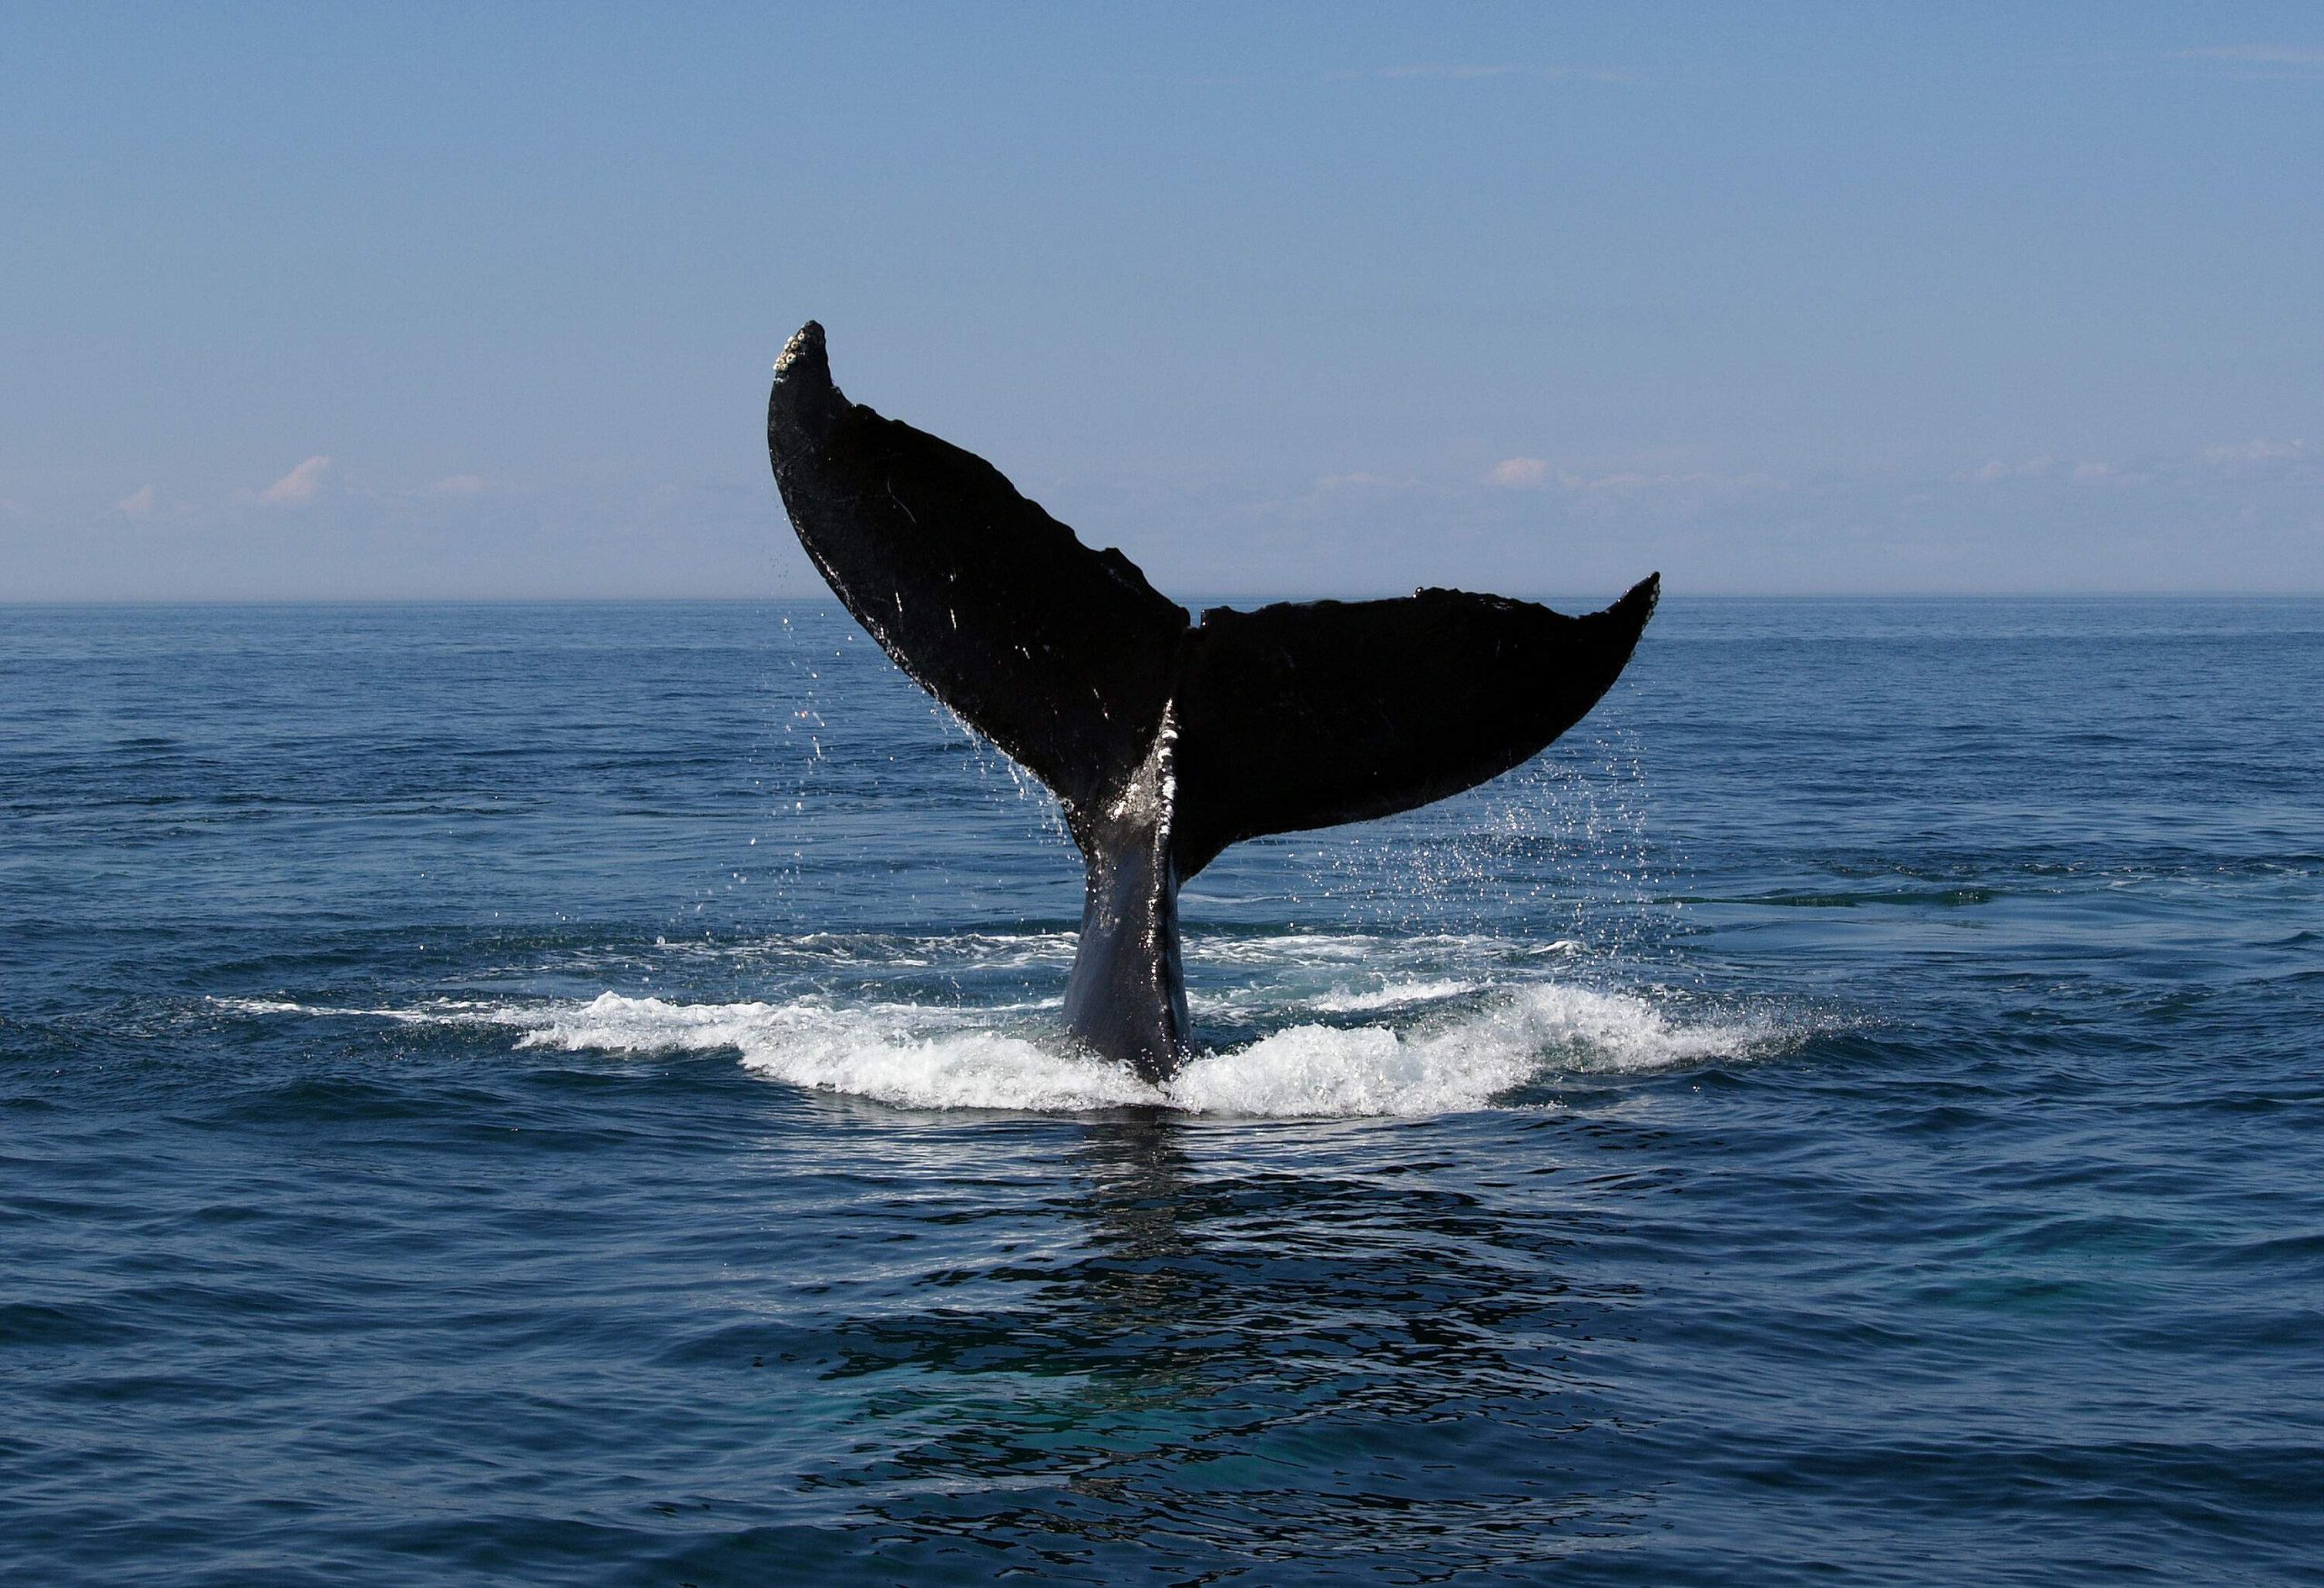 A tail of a whale poking through the surface of the ocean.